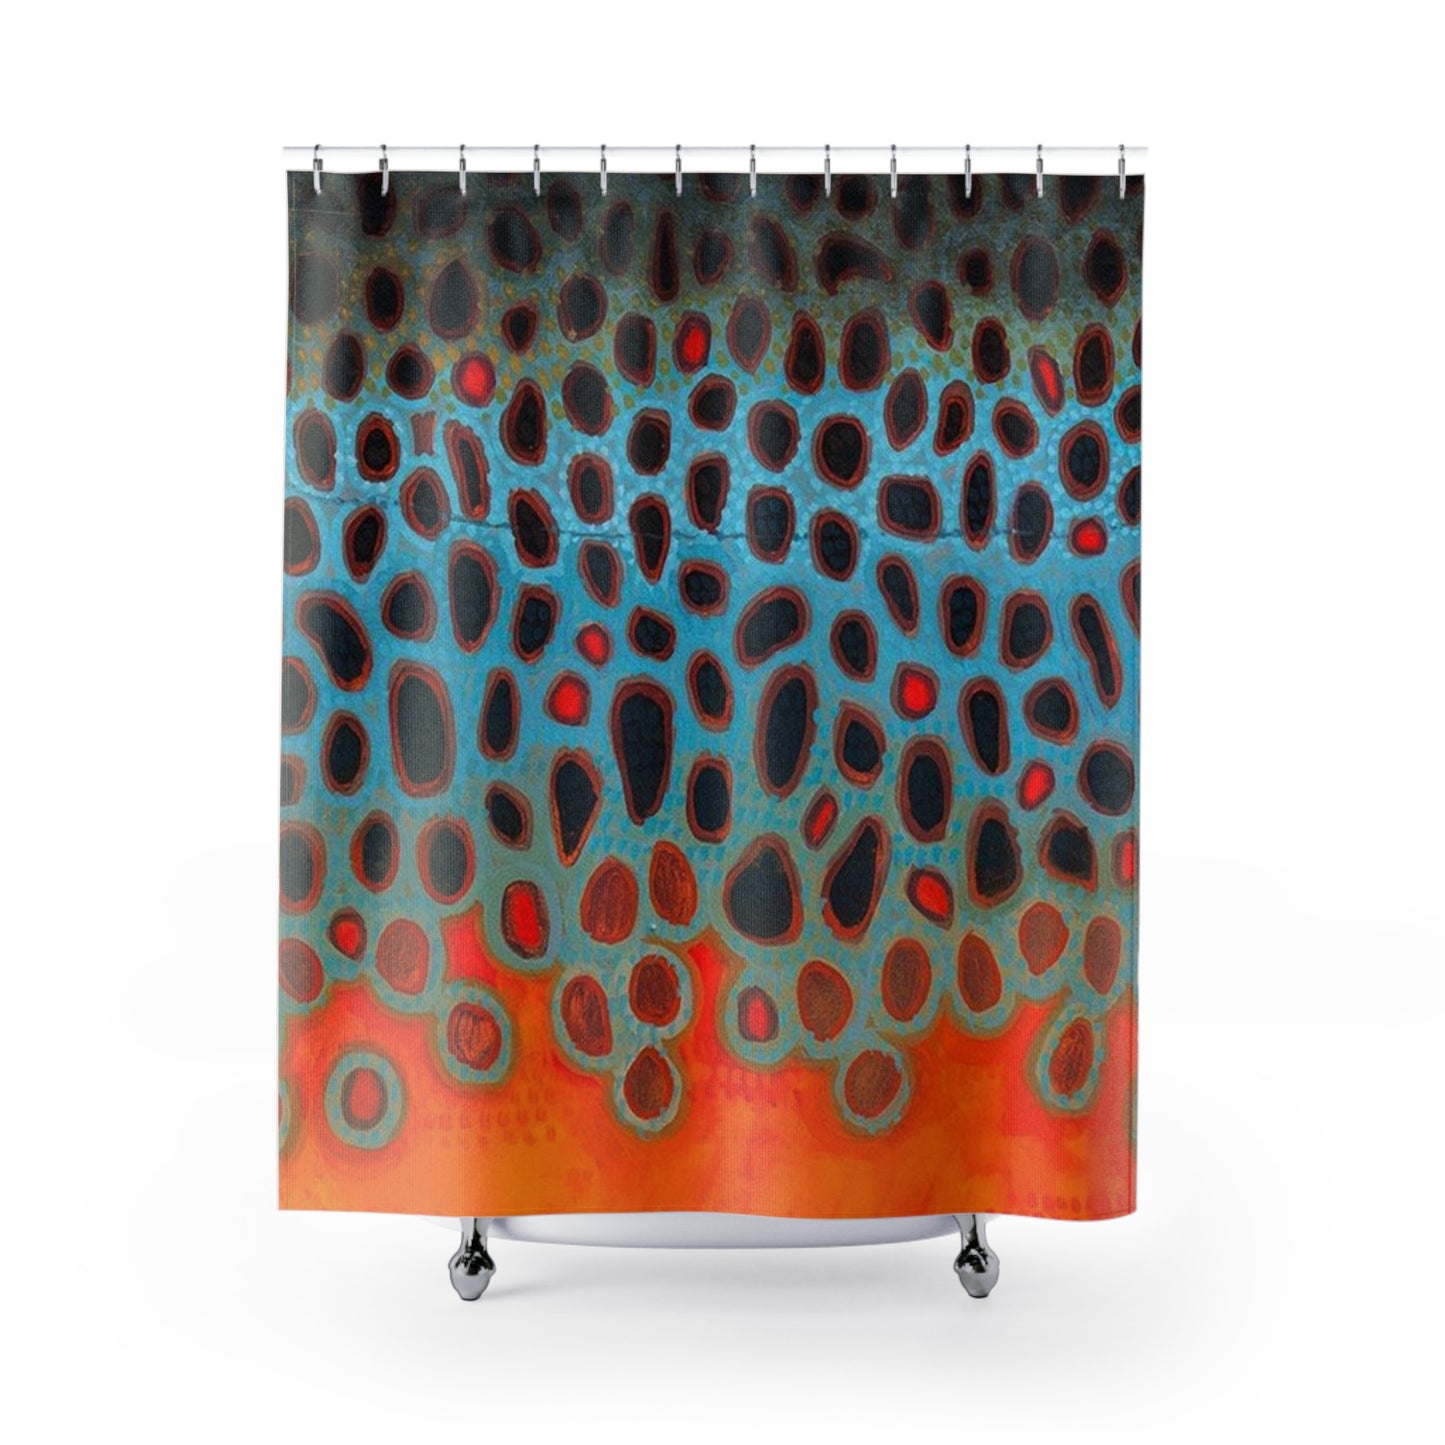 Shower Curtains, Trout Curtain, Fishing Shower Curtain